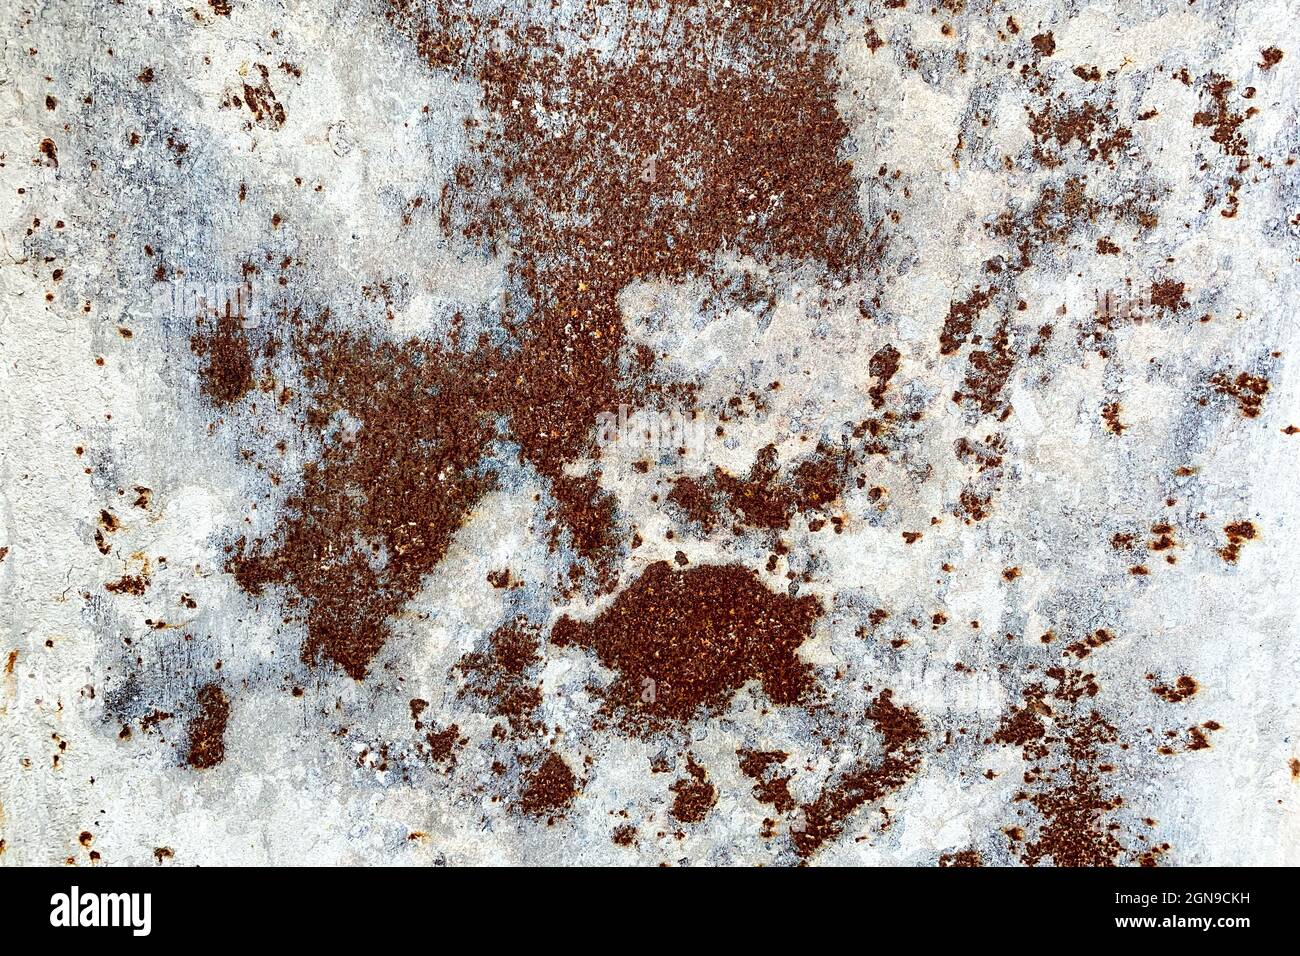 Damaged old peeling paint white background rusty metal flat pallet. Cracked oil paint on aged metal surface. Close-up. Outdoors. Stock Photo